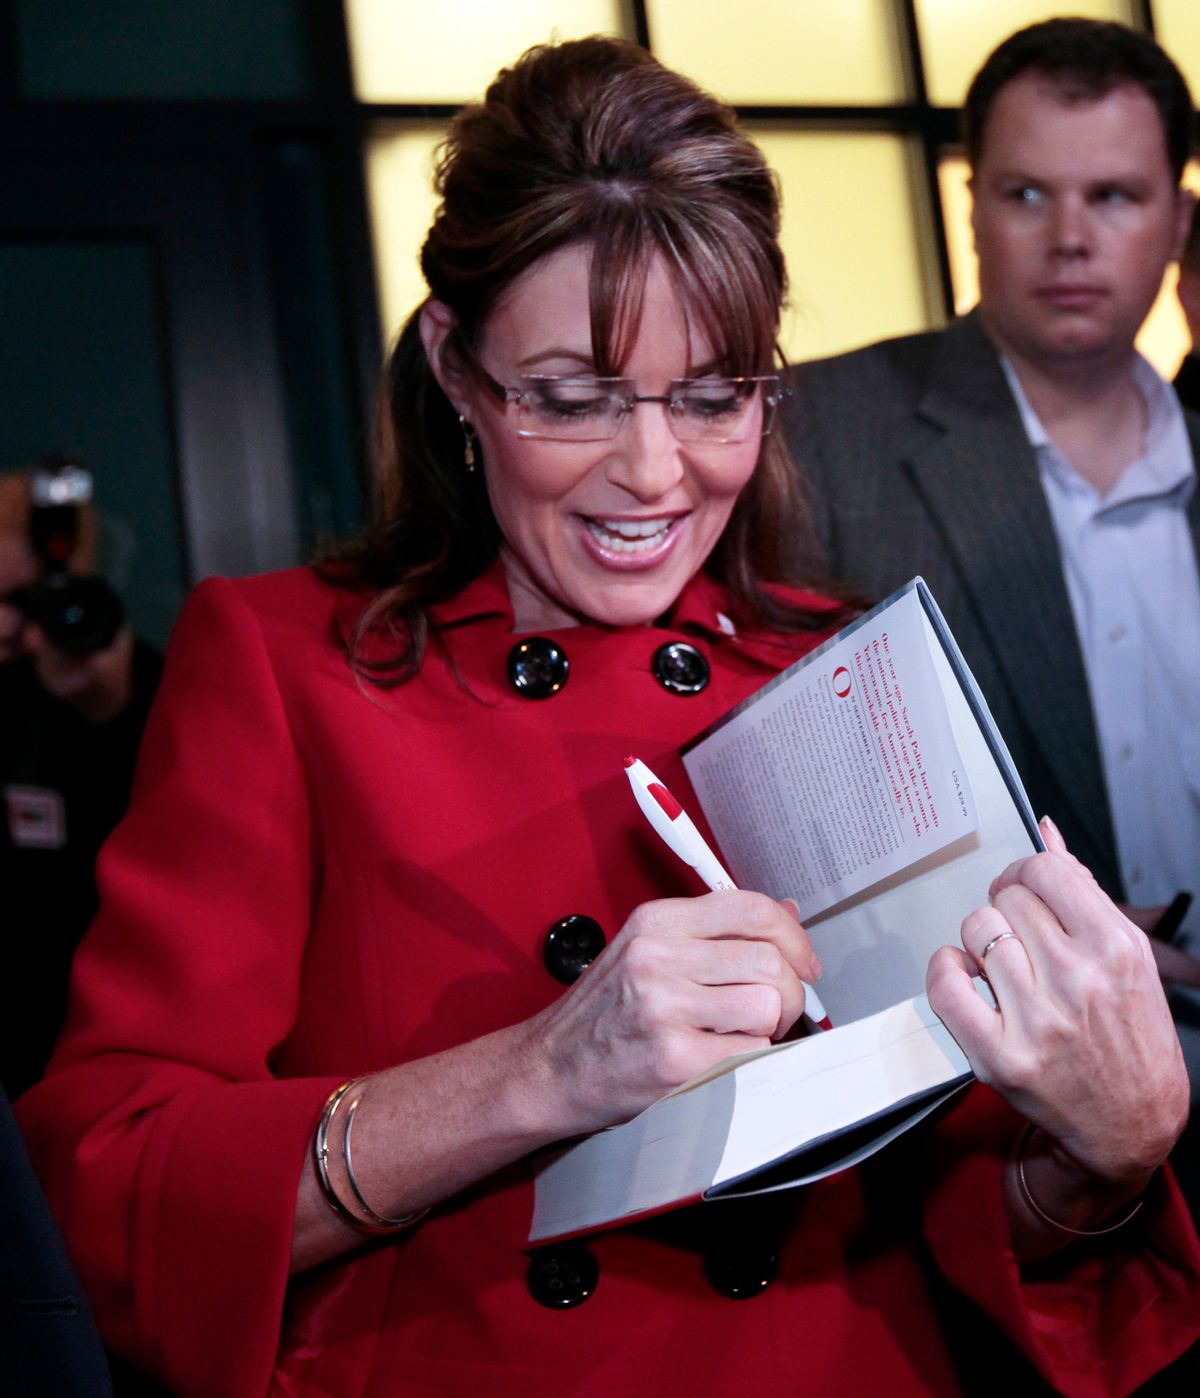 Sarah Palin signs copies of her new book 'Going Rogue' at her book signing in Grand Rapids, Michigan November 18, 2009.  REUTERS/Rebecca Cook (UNITED STATES POLITICS MEDIA) (Reuters)